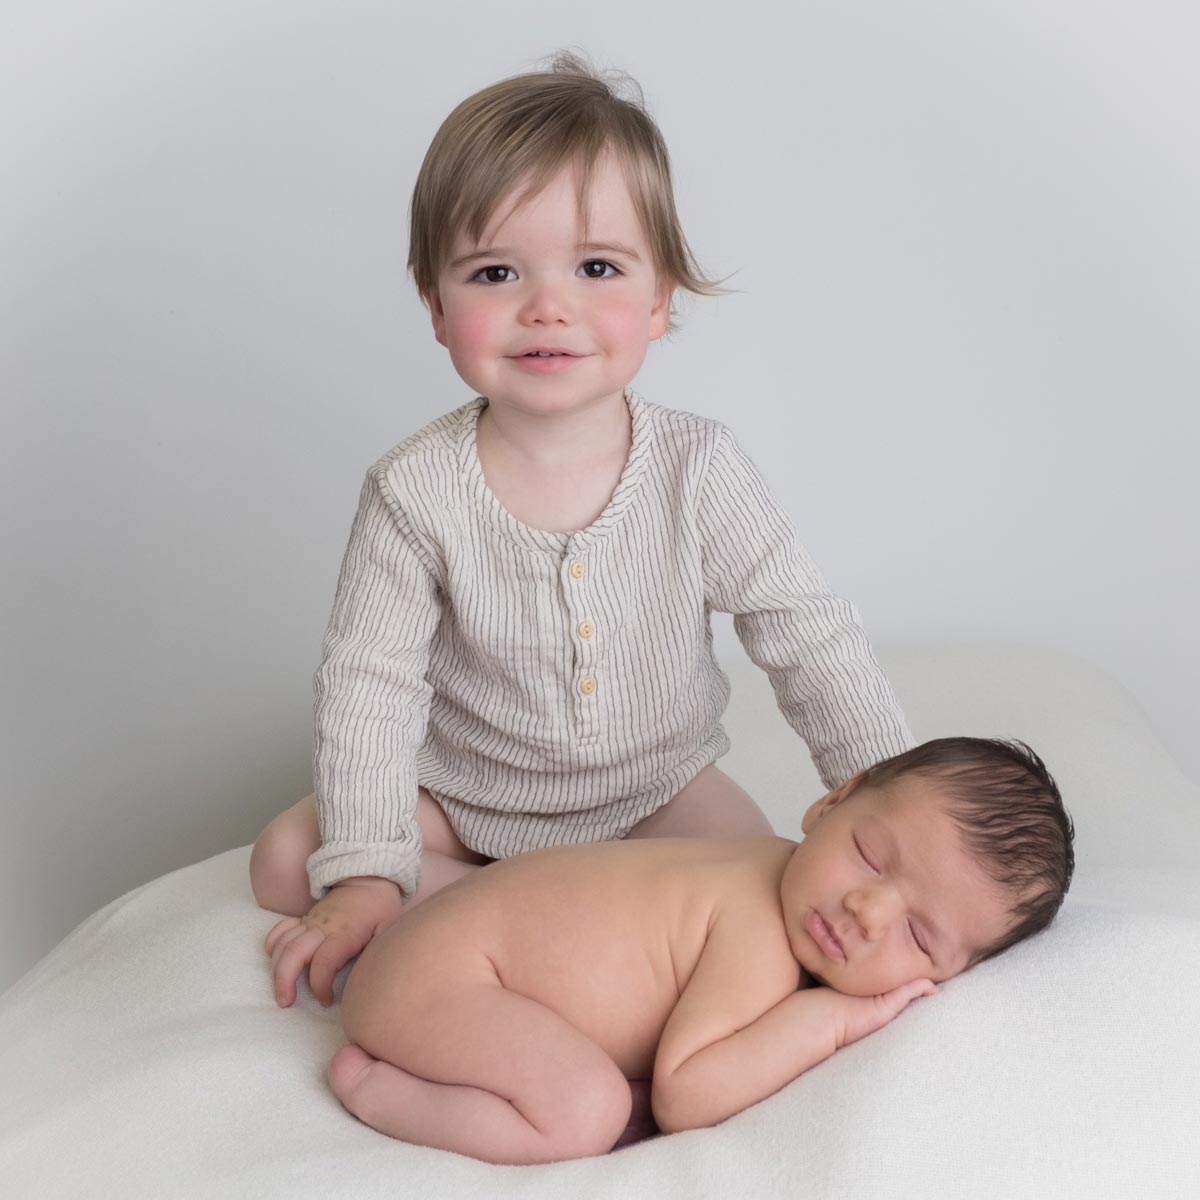 Sibling photos with newborn baby How-To Guide 8